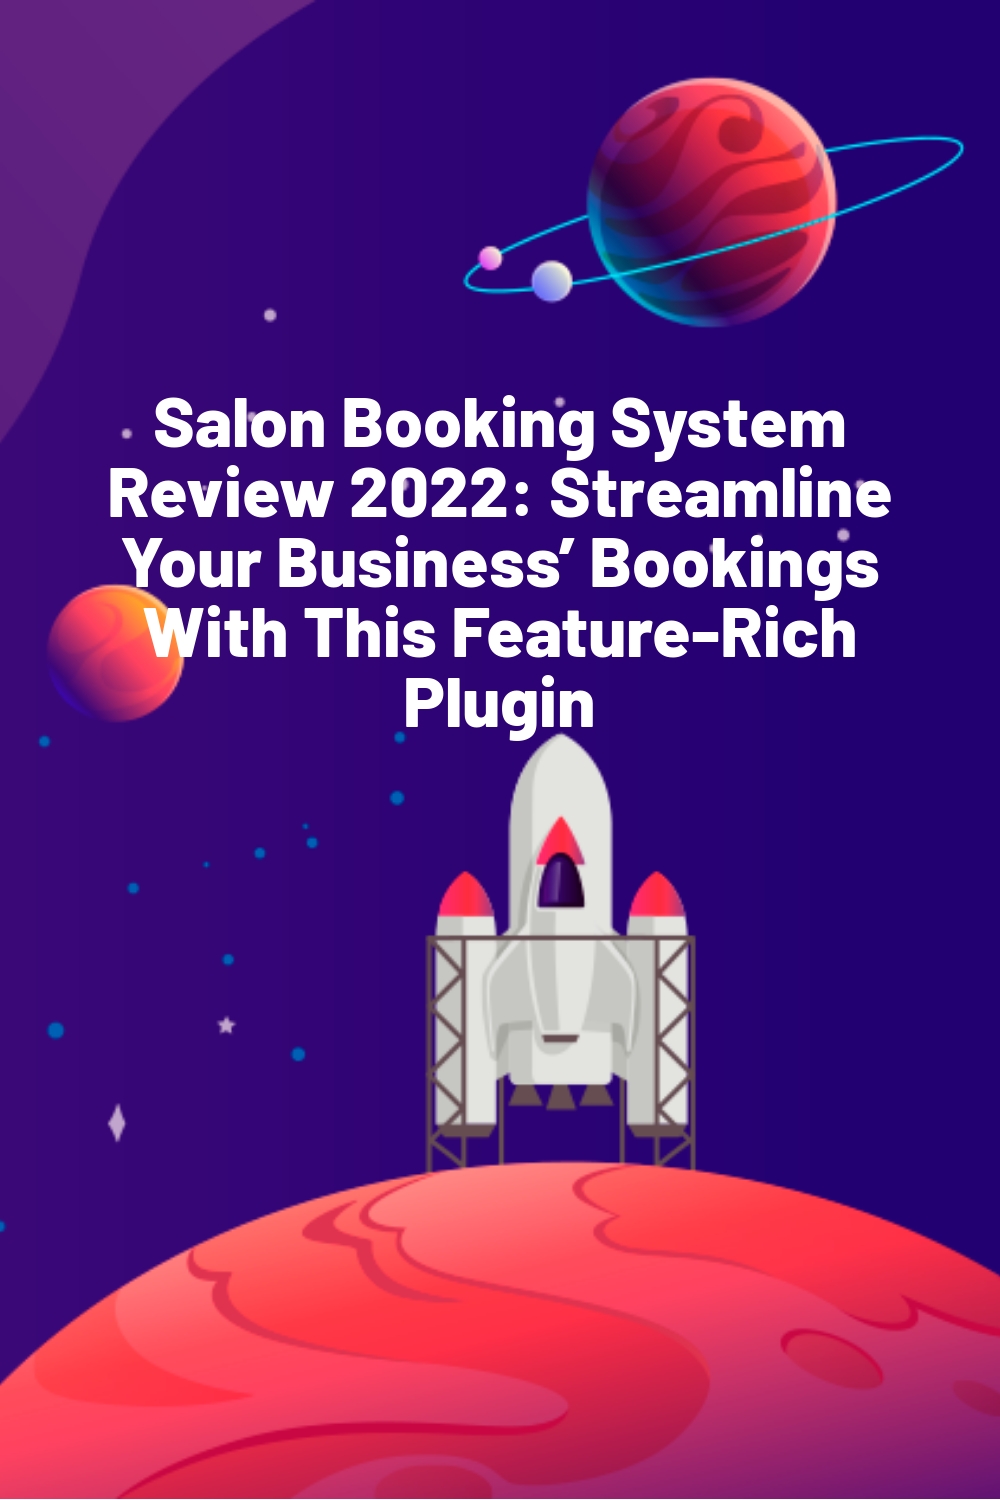 Salon Booking System Review 2022: Streamline Your Business’ Bookings With This Feature-Rich Plugin